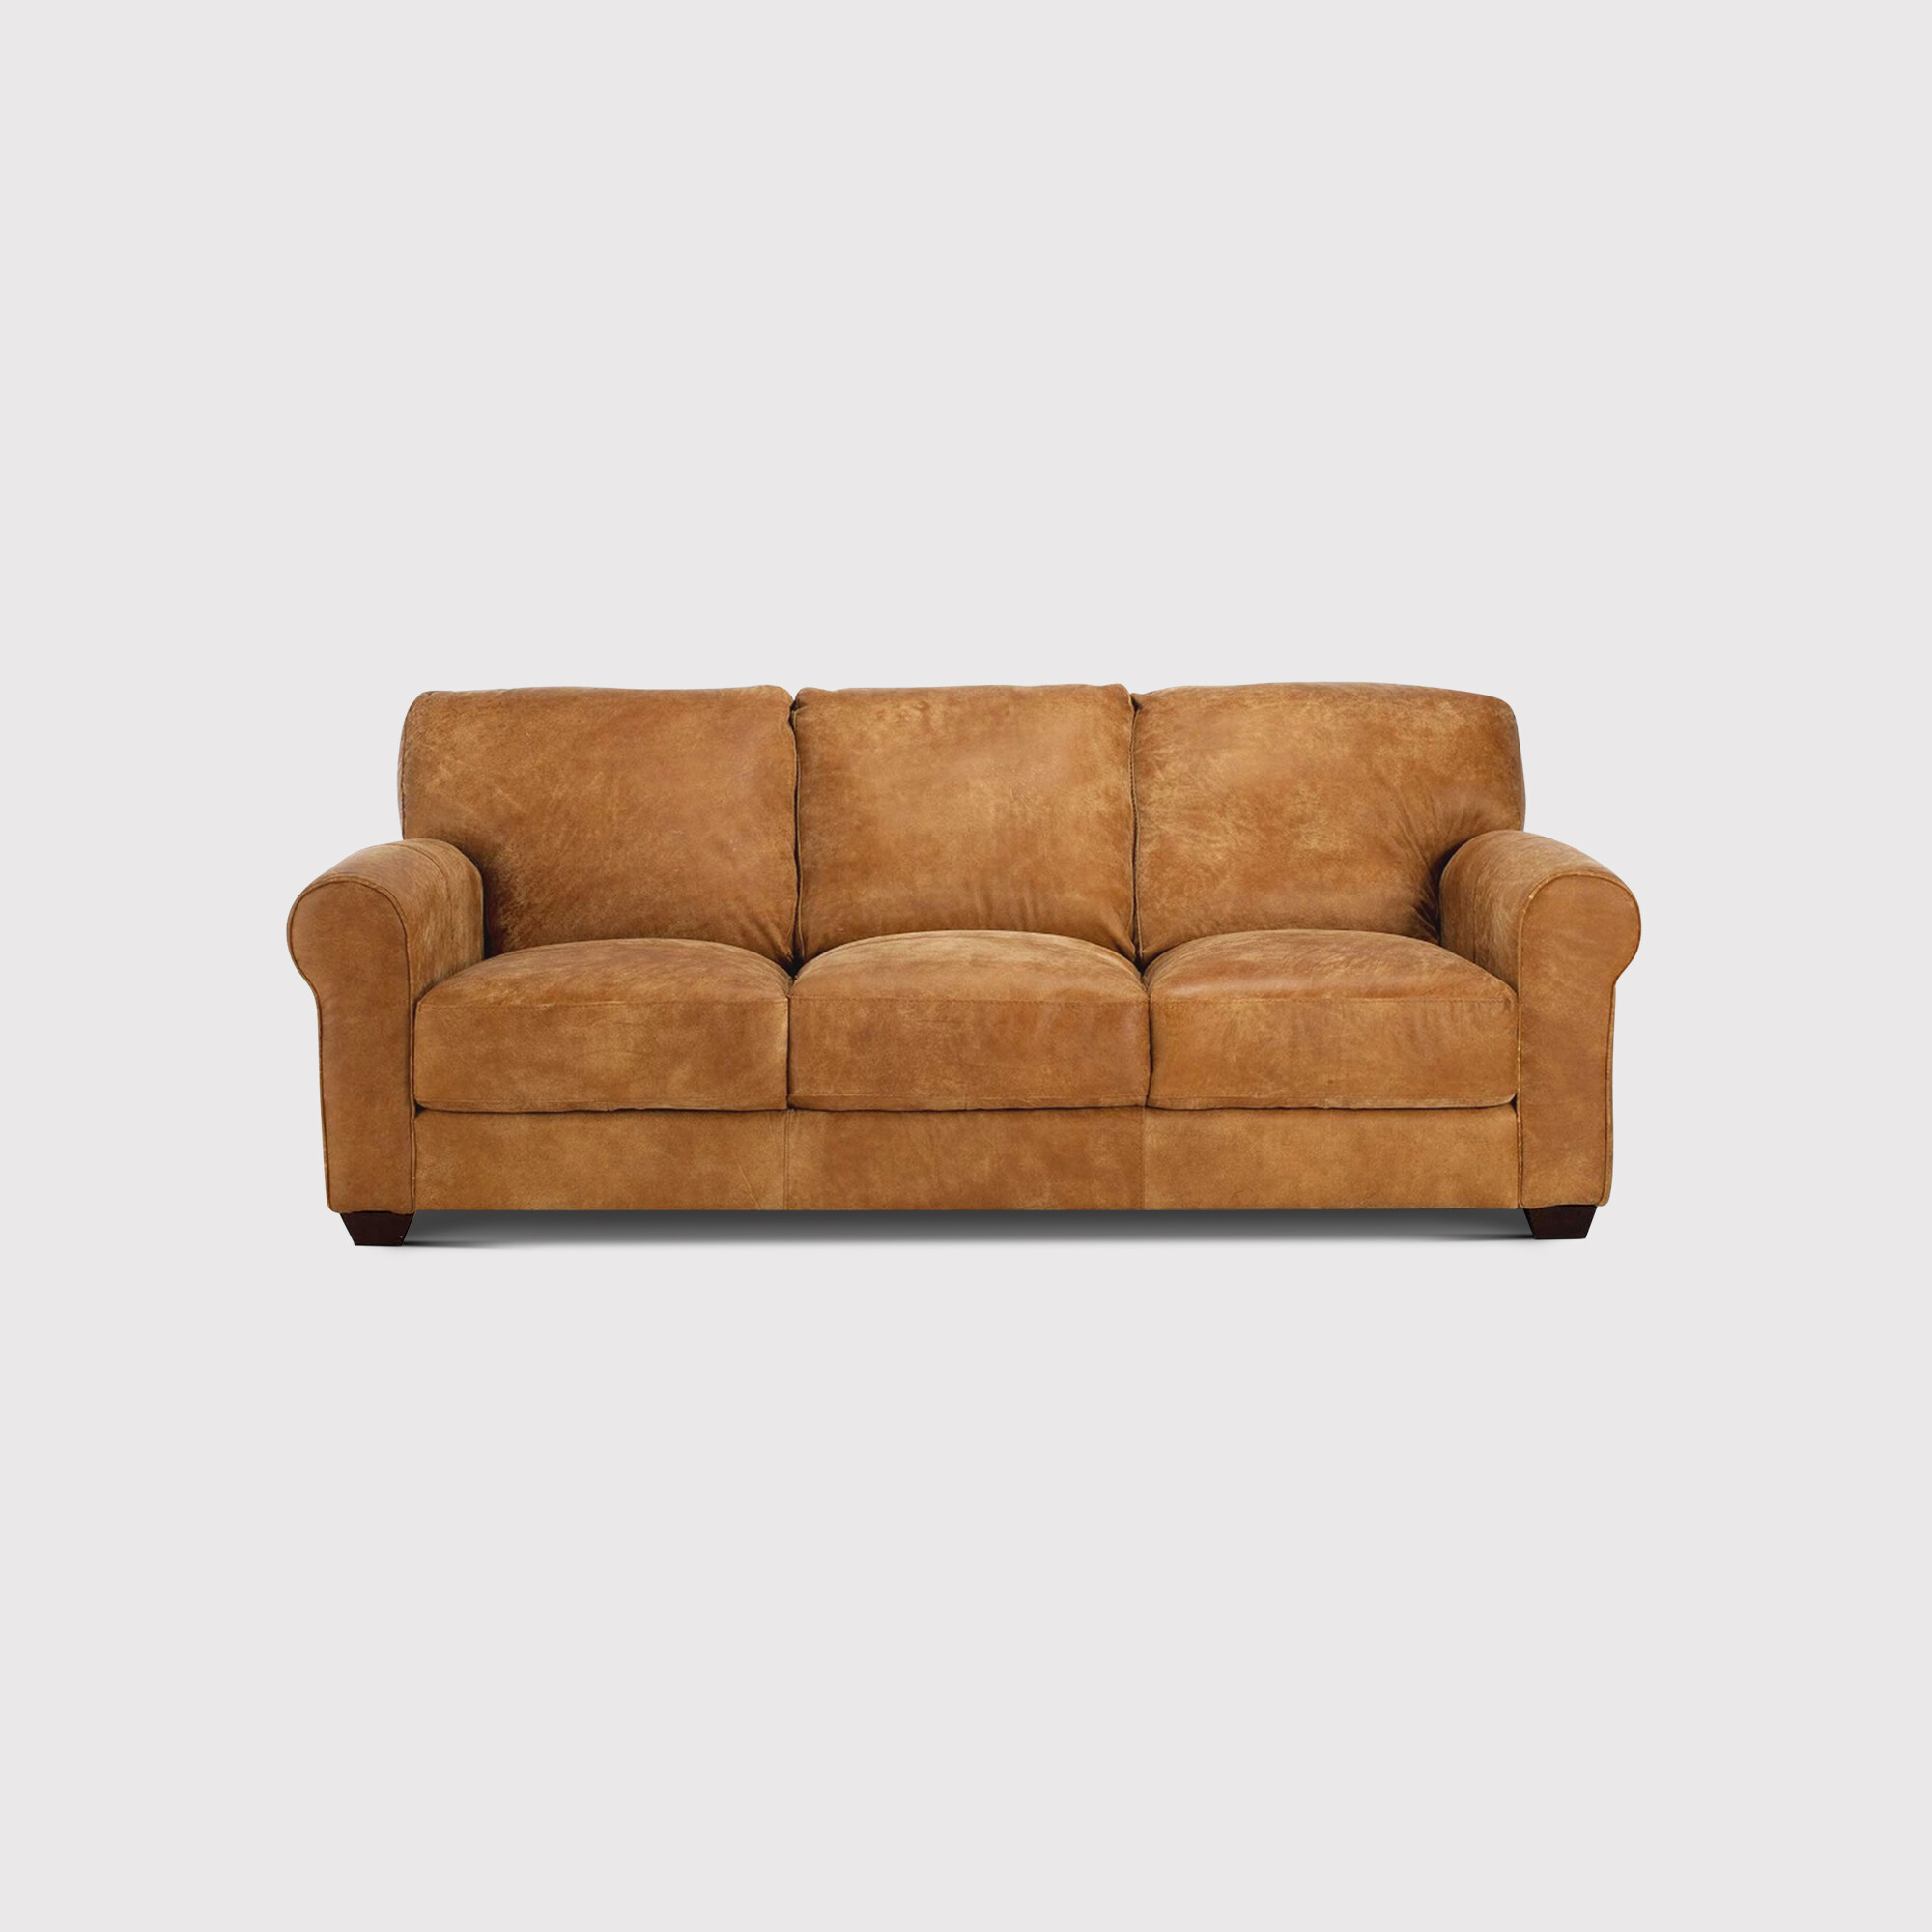 Houston 3 Seater Sofa, Brown Leather | Barker & Stonehouse